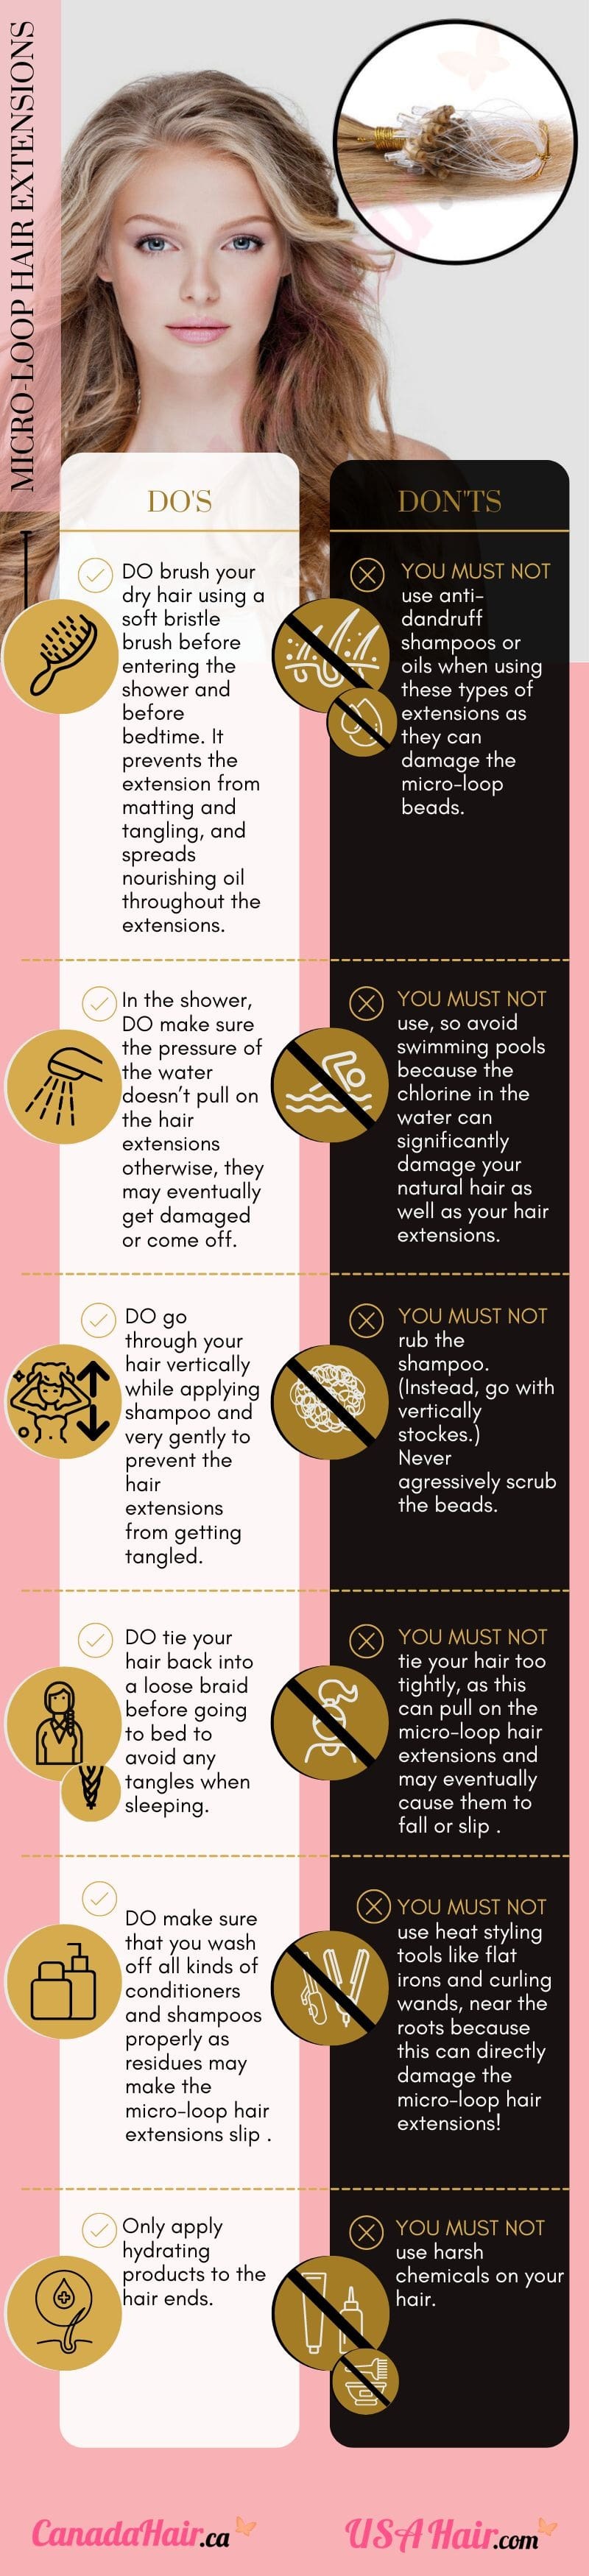 Do's and Dont's MICRO-LOOP \(800 x 3500 px\)-min.jpg